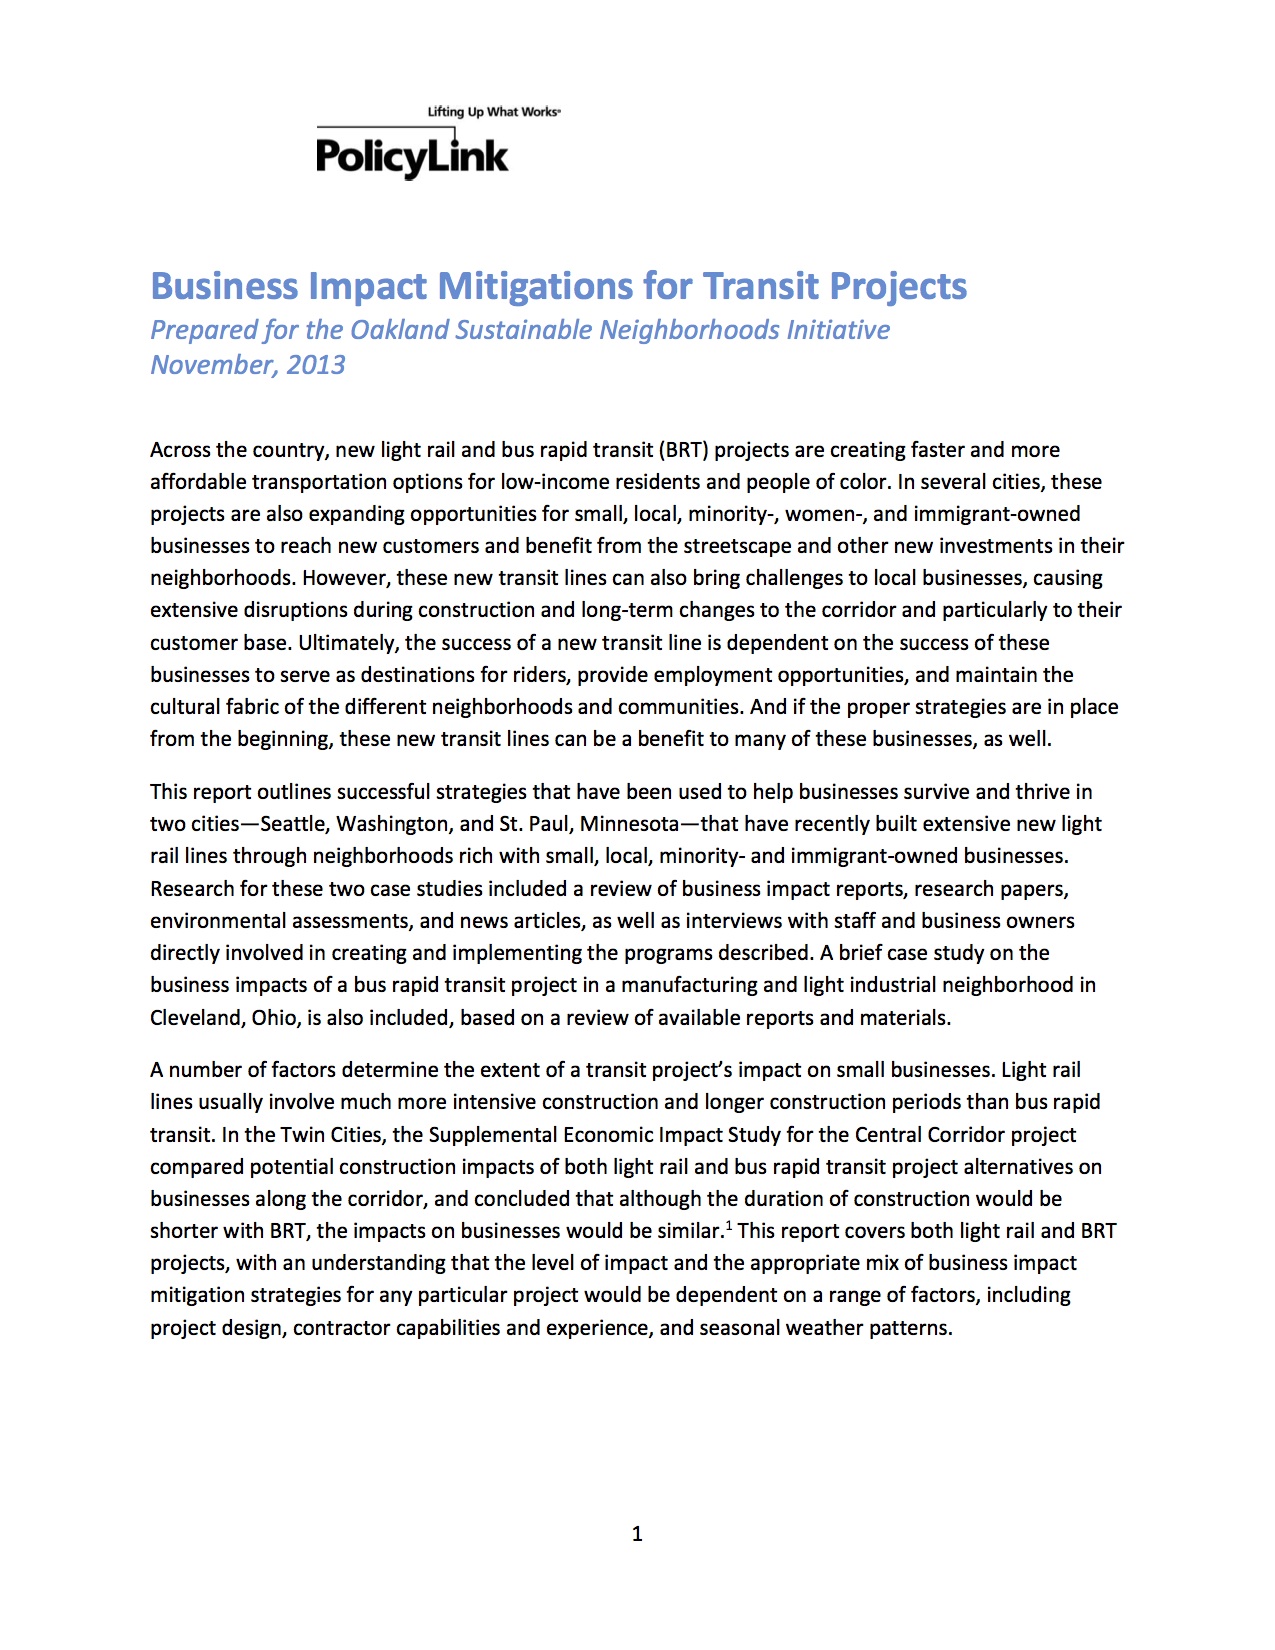 Business Impact Mitigations for Transit Projects